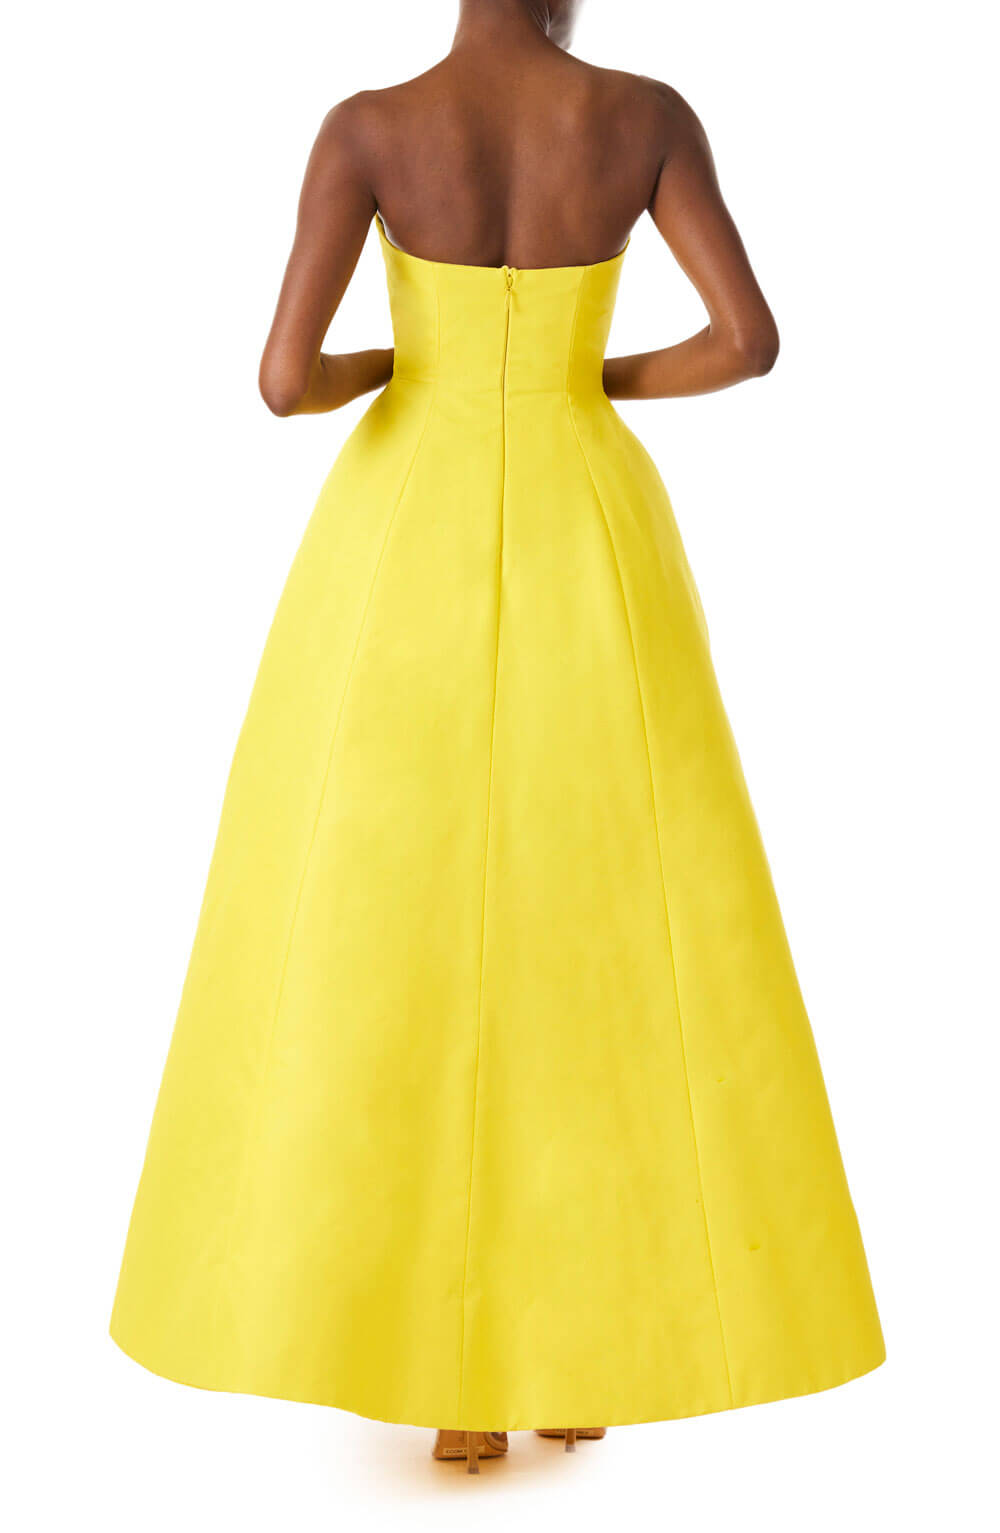 Monique Lhuillier canary yellow strapless gown with high-low hem in cotton/silk faille fabric.